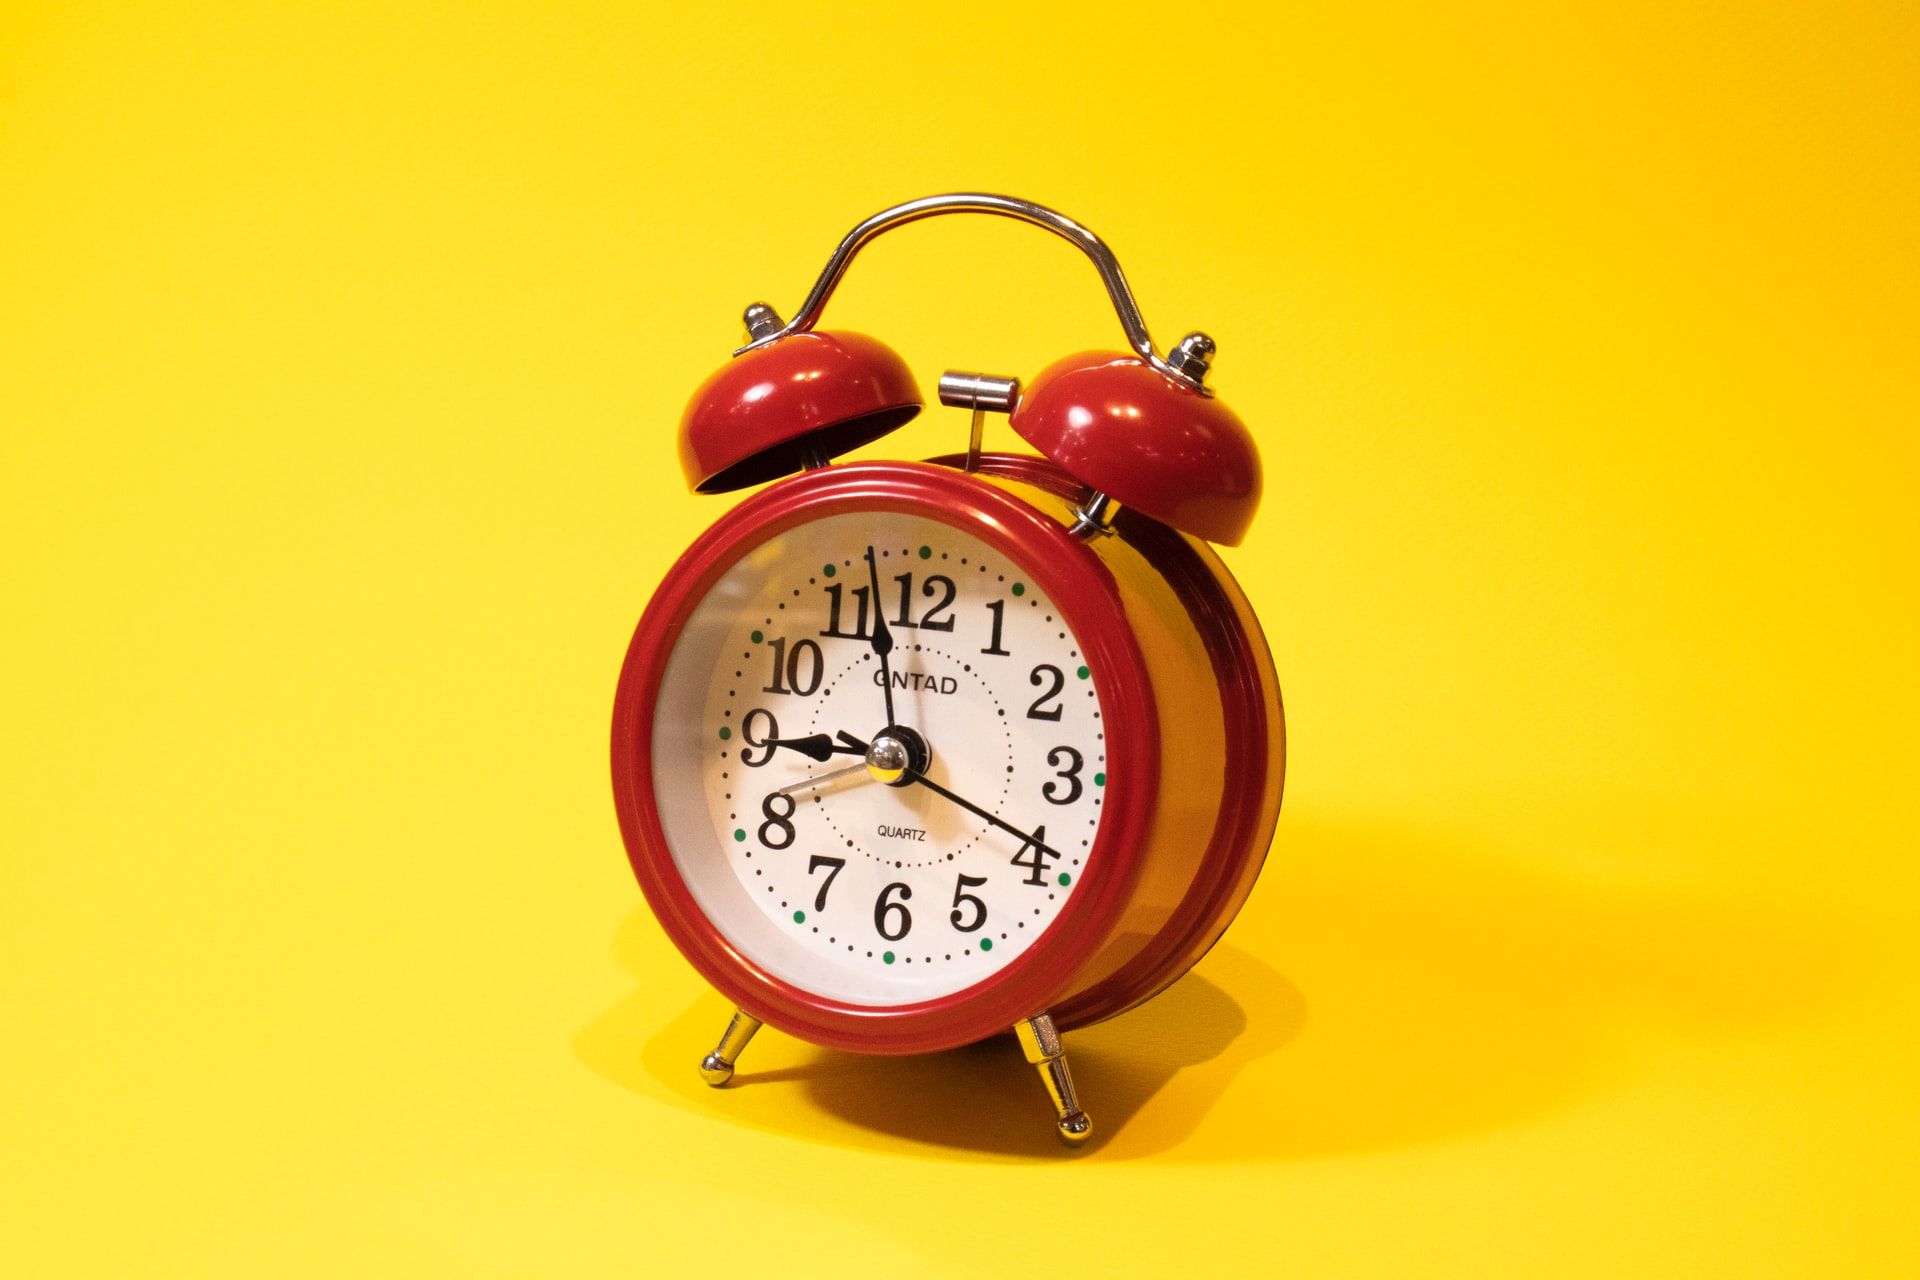 Image shows a bright red alarm clock on a yellow background